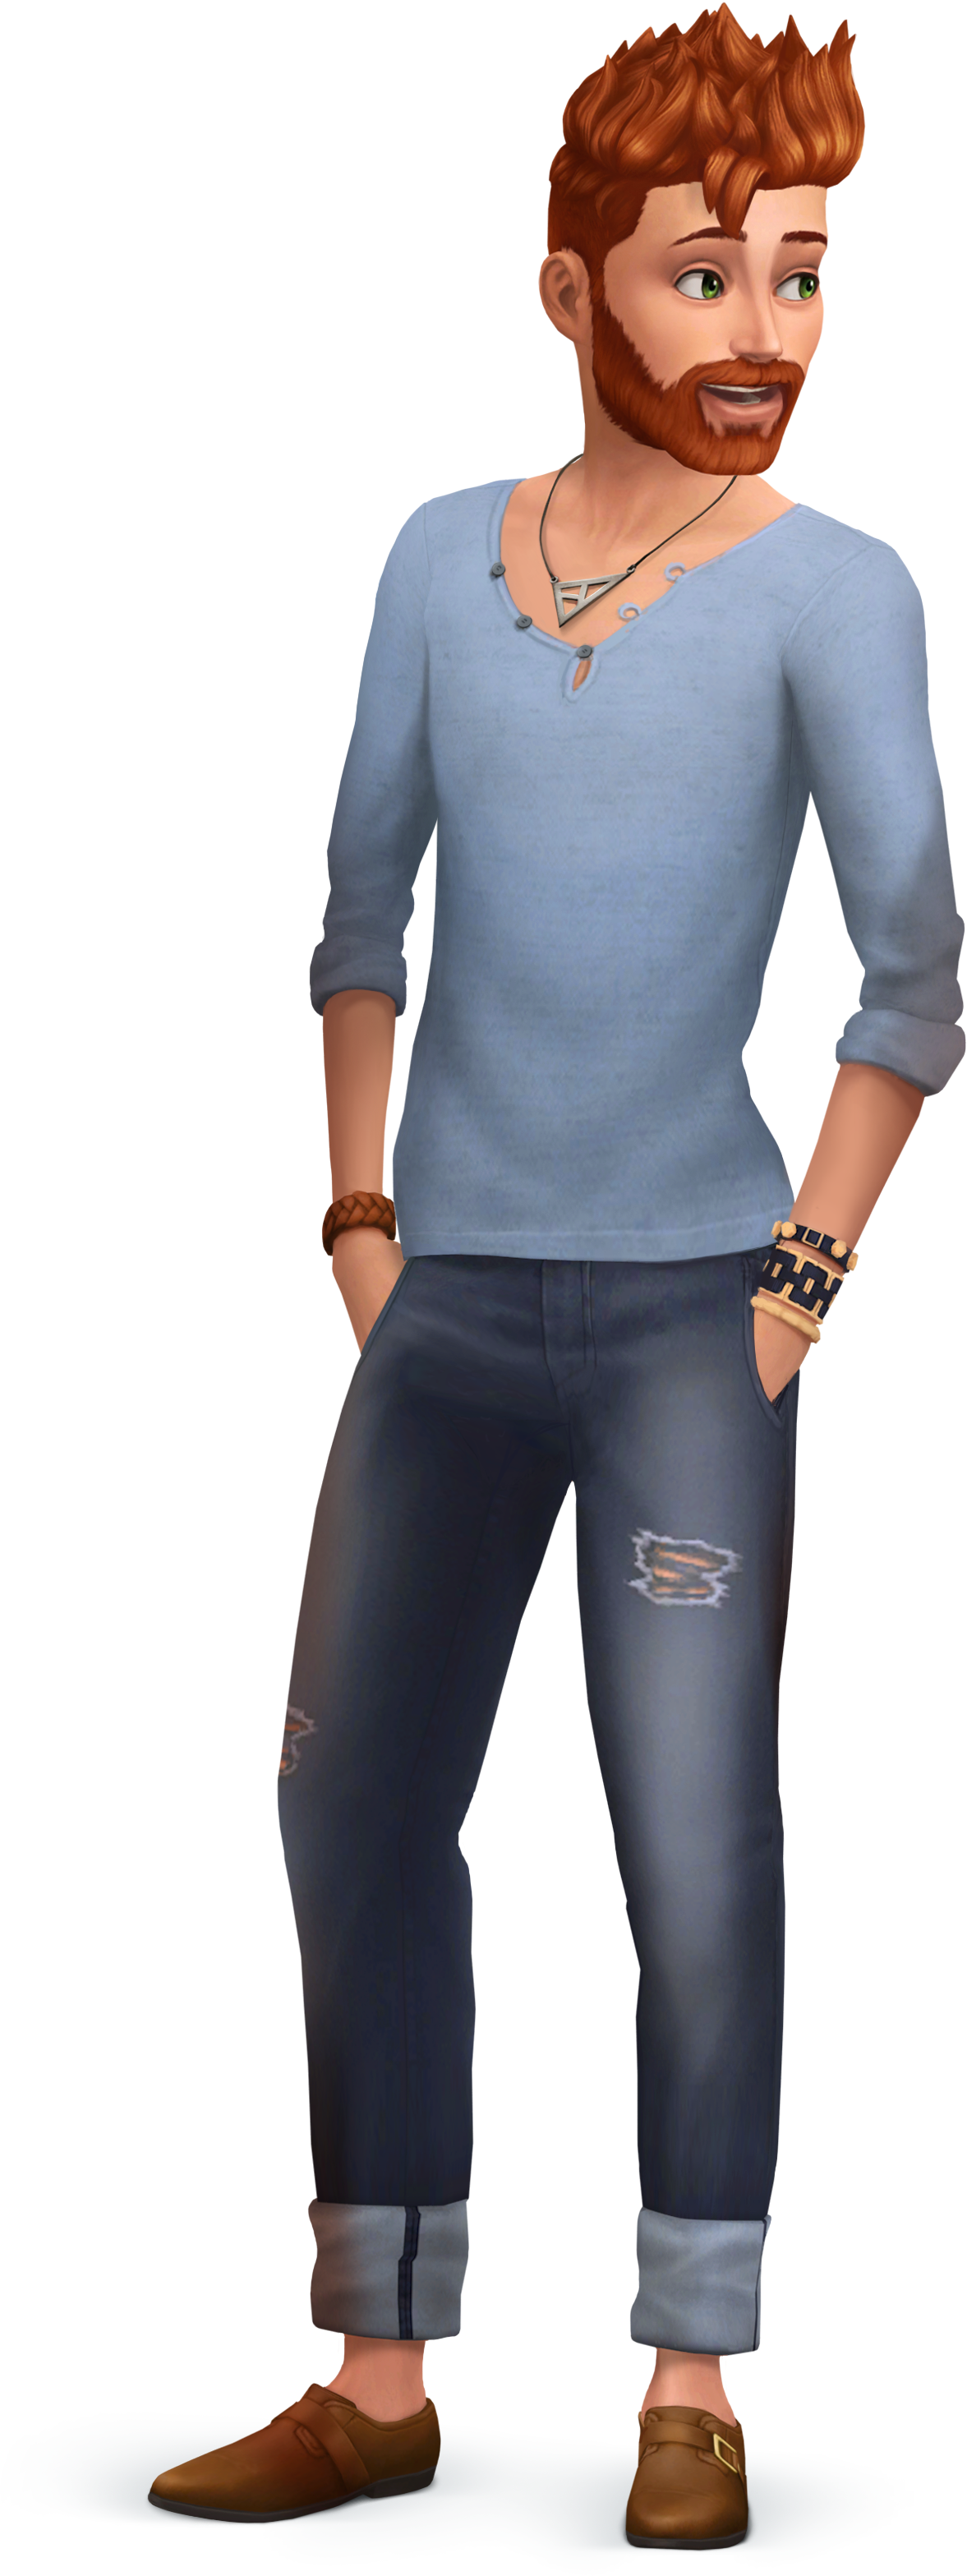 Sims Mobile Shoulder Standing Free Photo PNG PNG Image